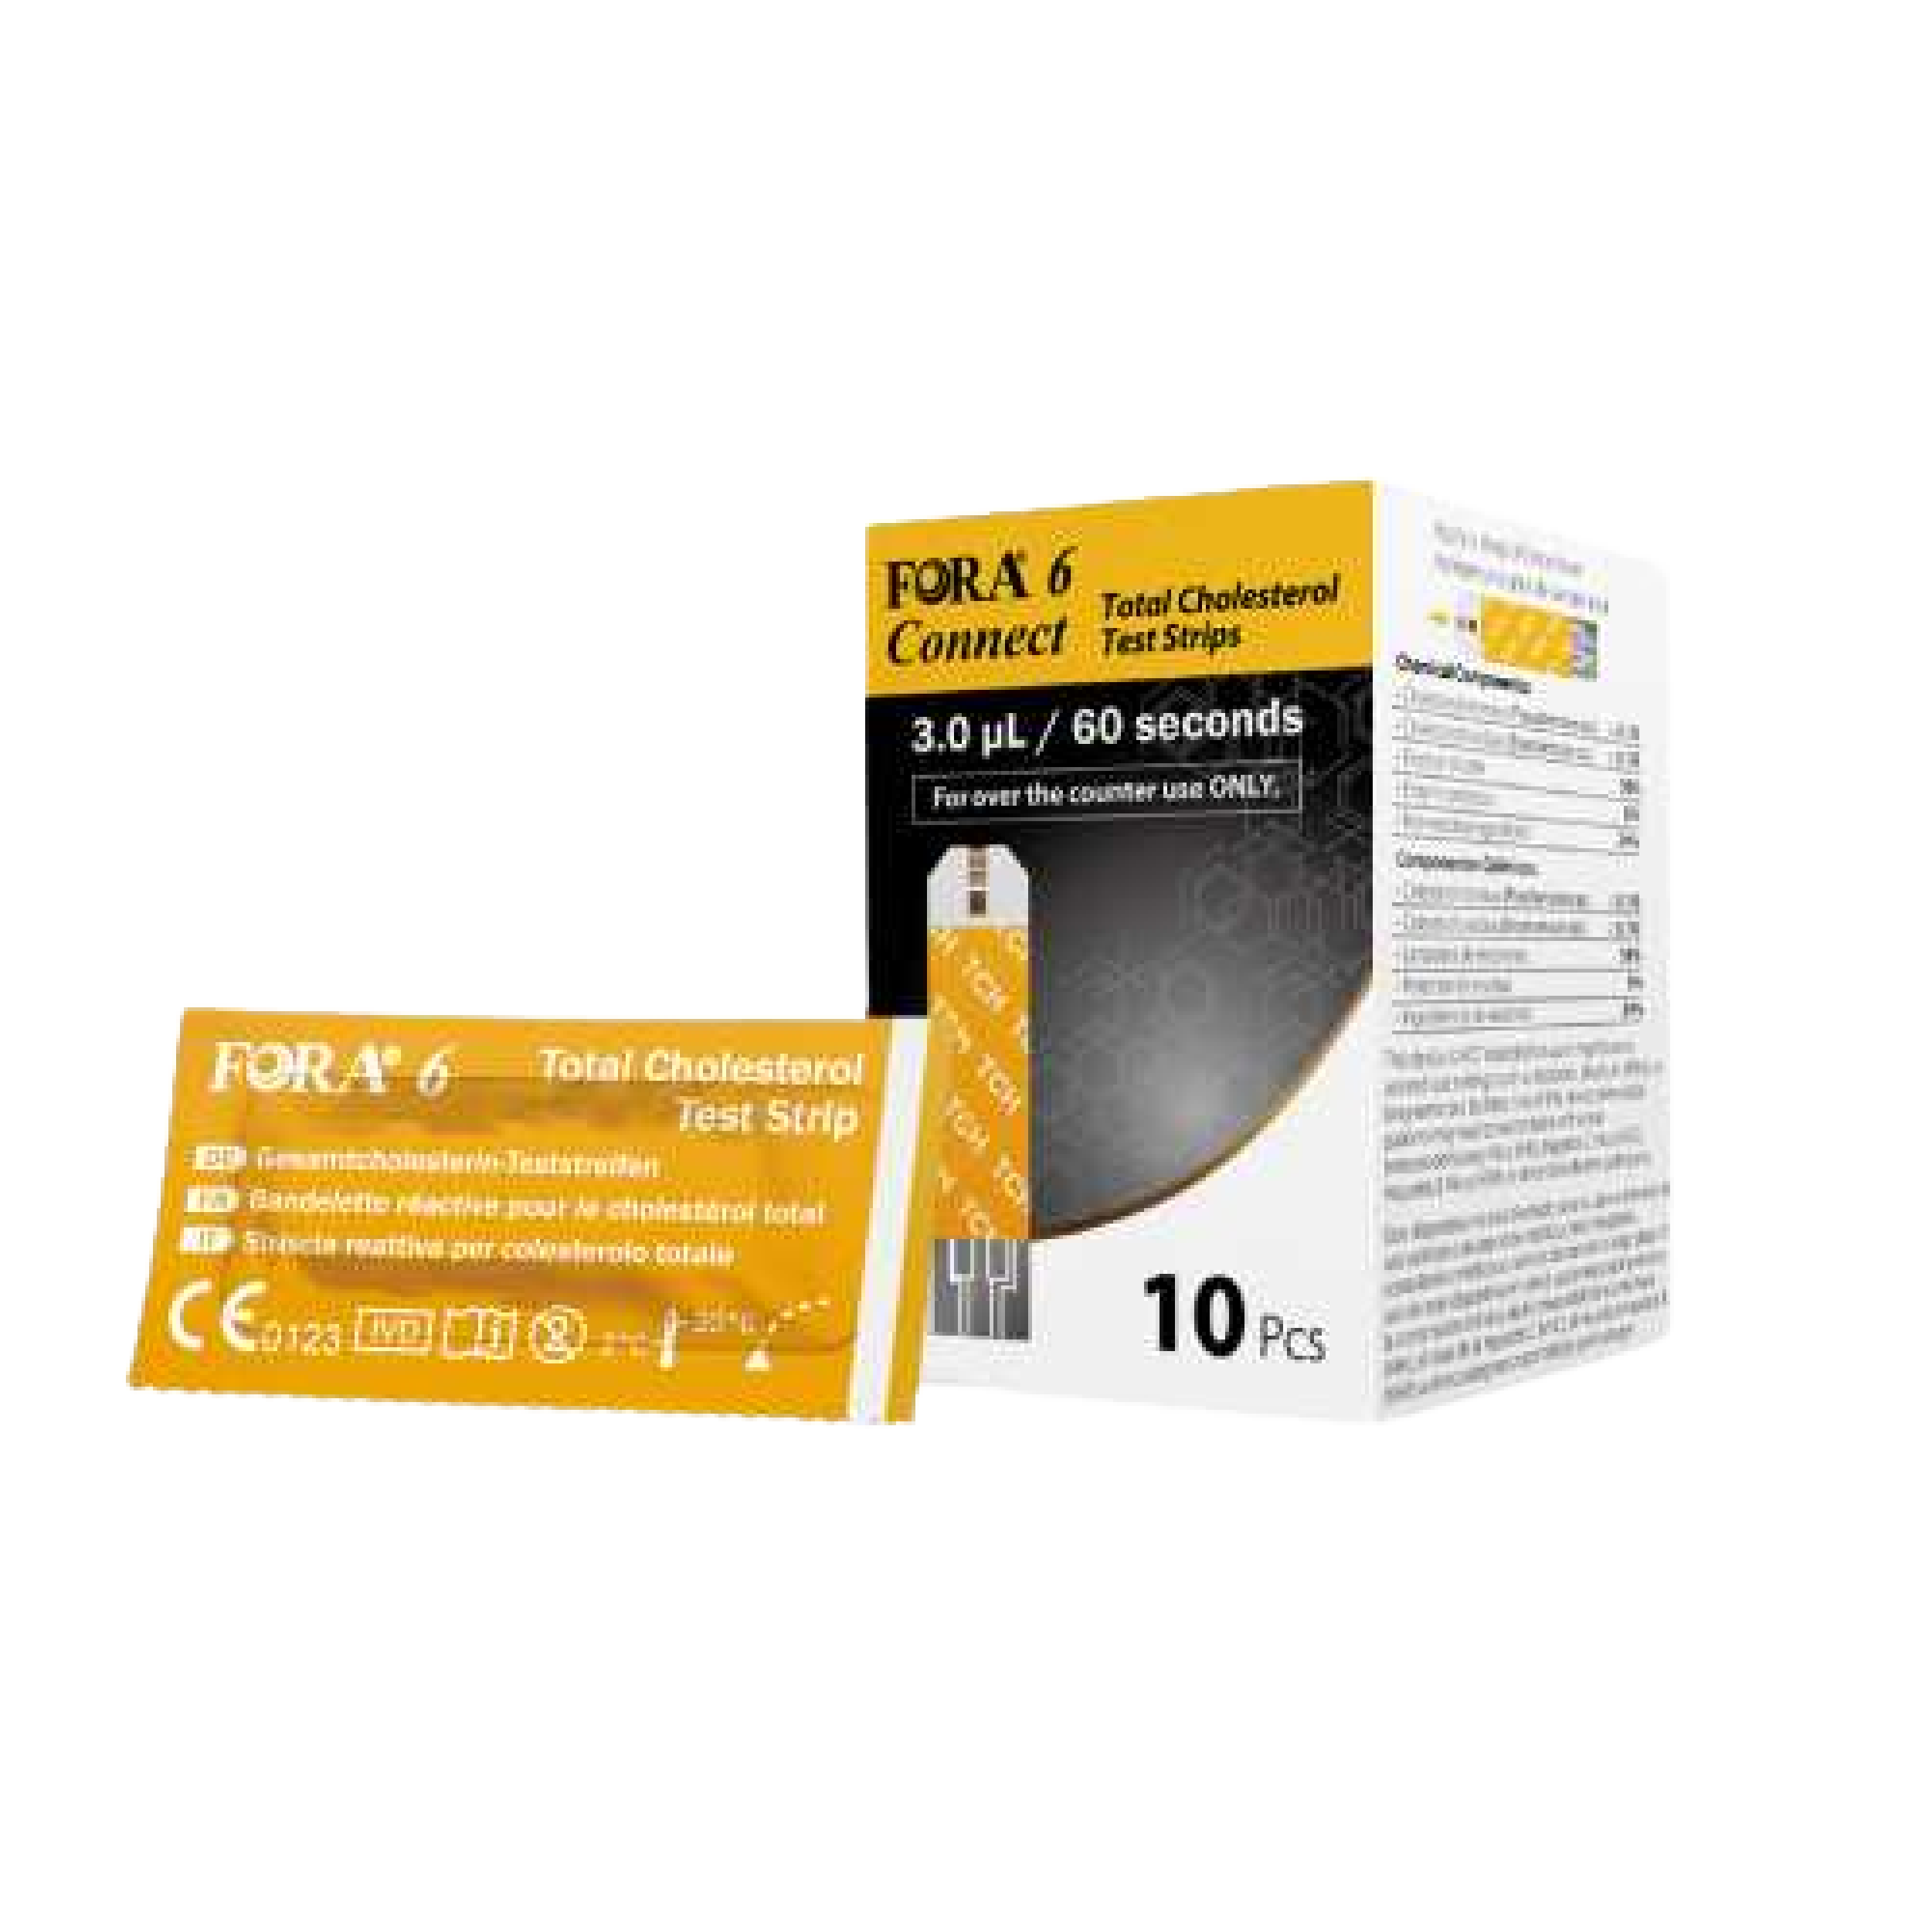 FORA 6 Connect Blood Total Cholesterol Test Strips (10pcs/box, Compatible with FORA 6 Connect Meter)